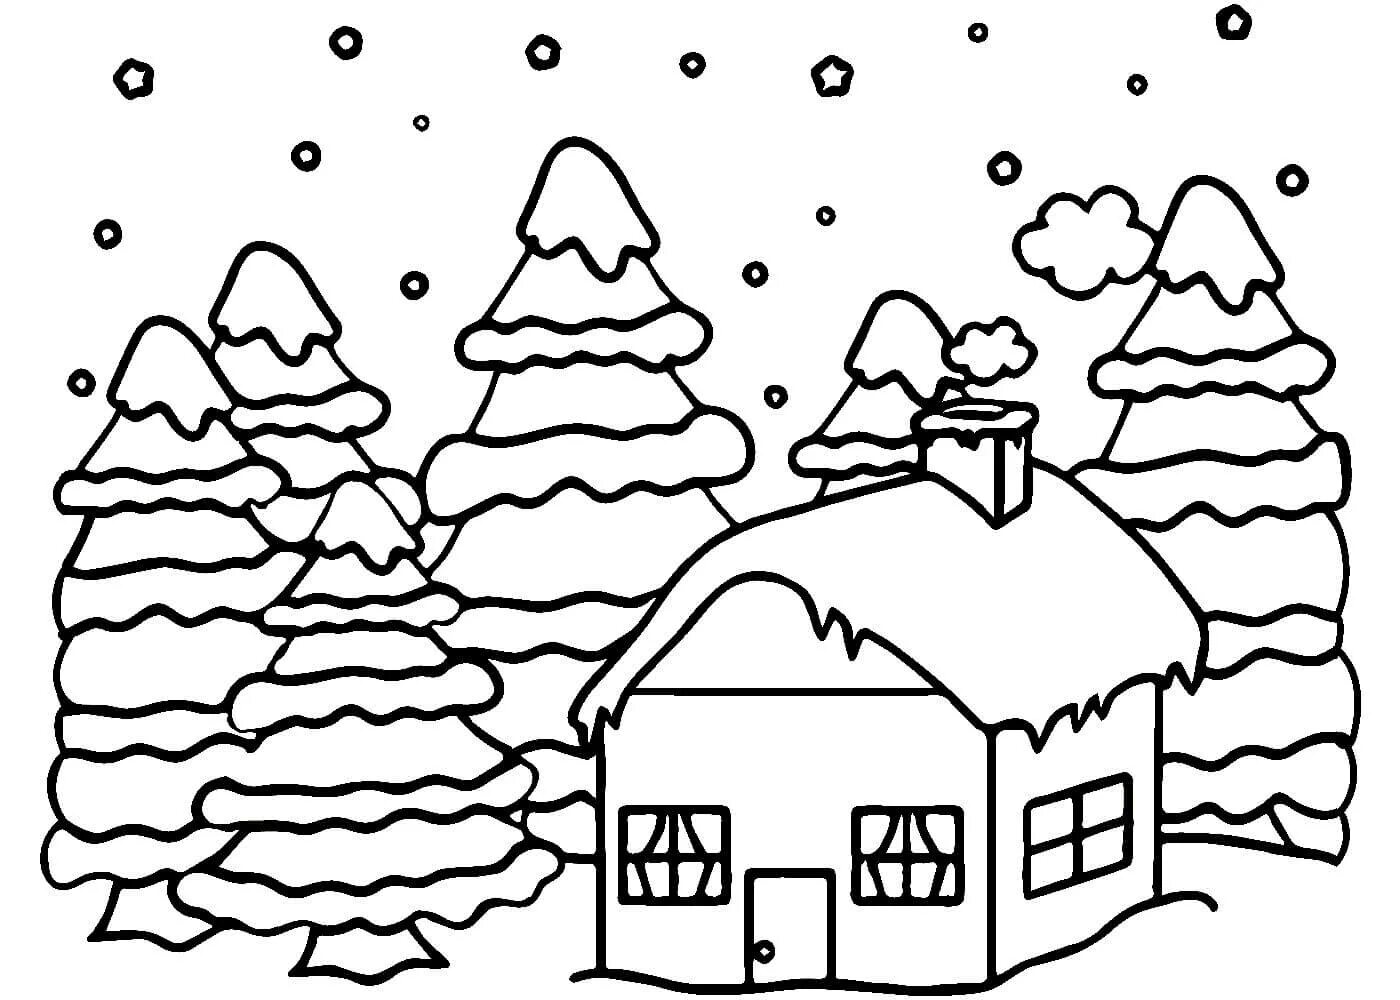 Nature in winter for kids #1